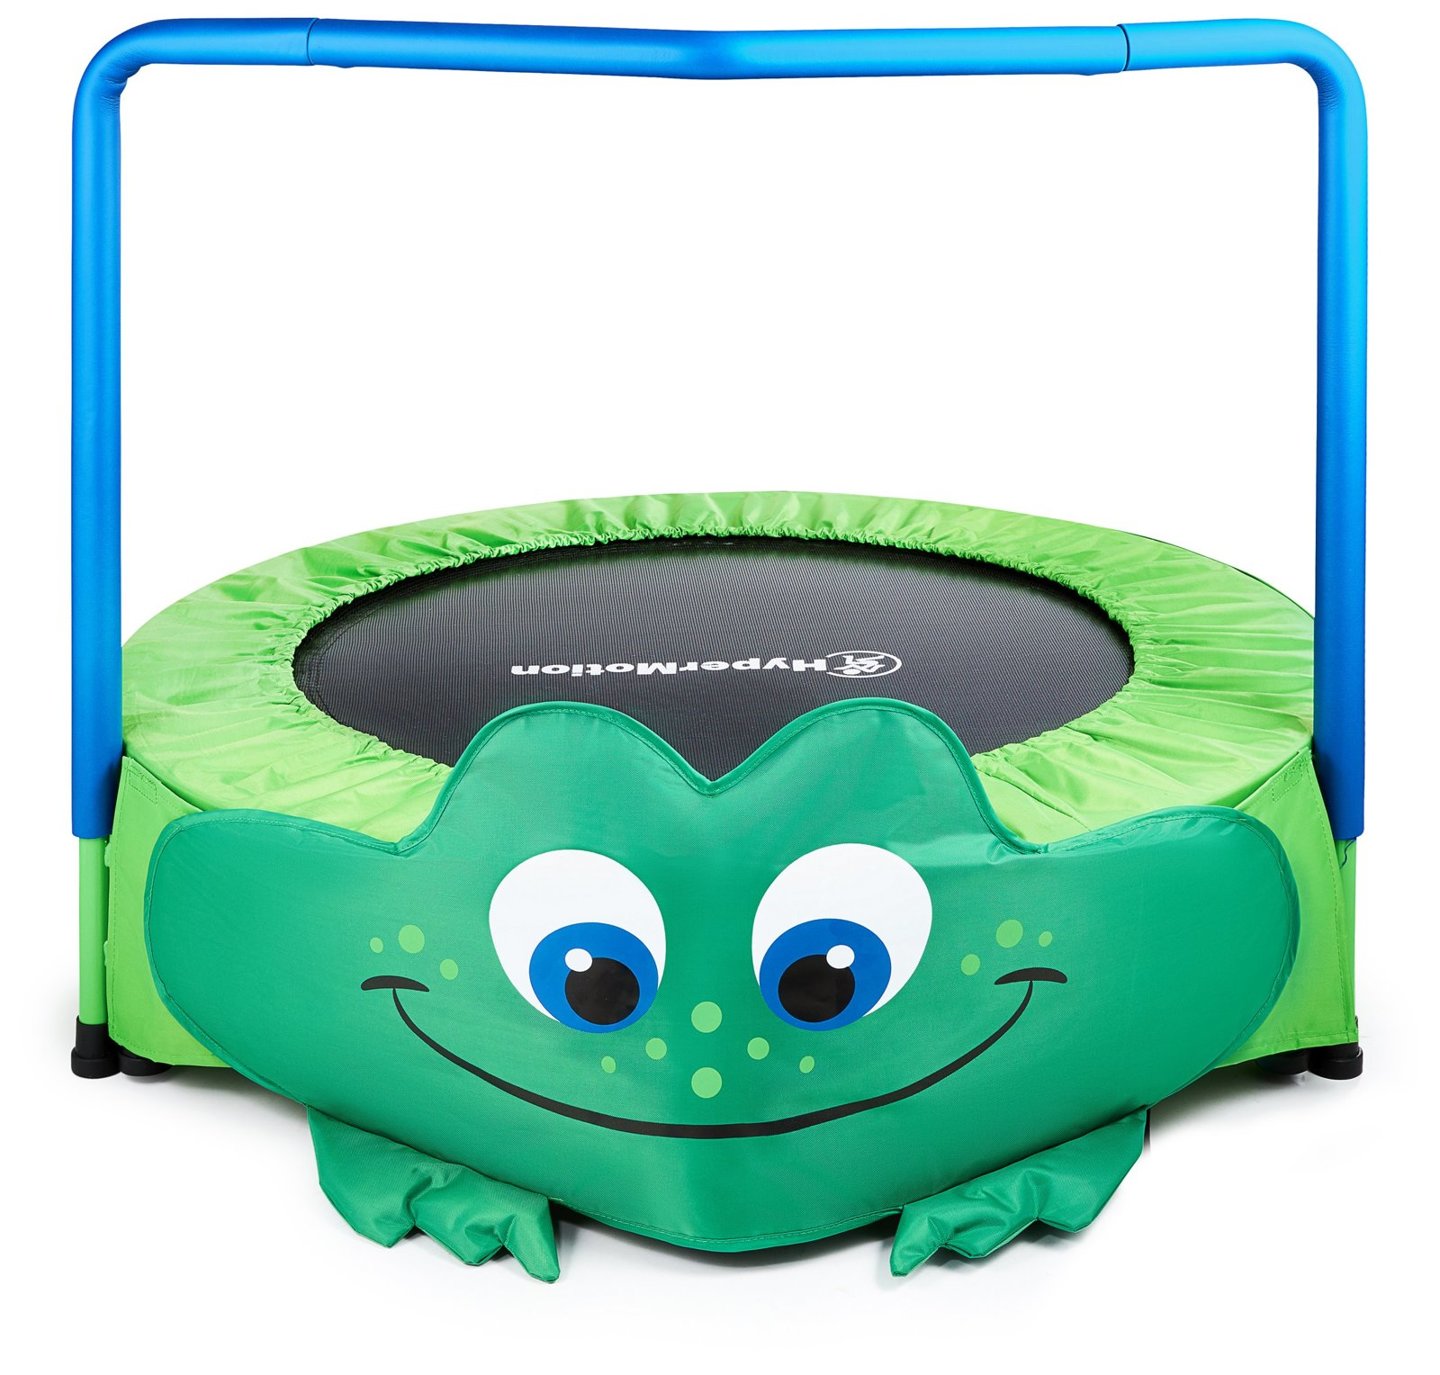 Frog - mini trampoline for kids - with handle - 50kg max - 91cm - for home and garden